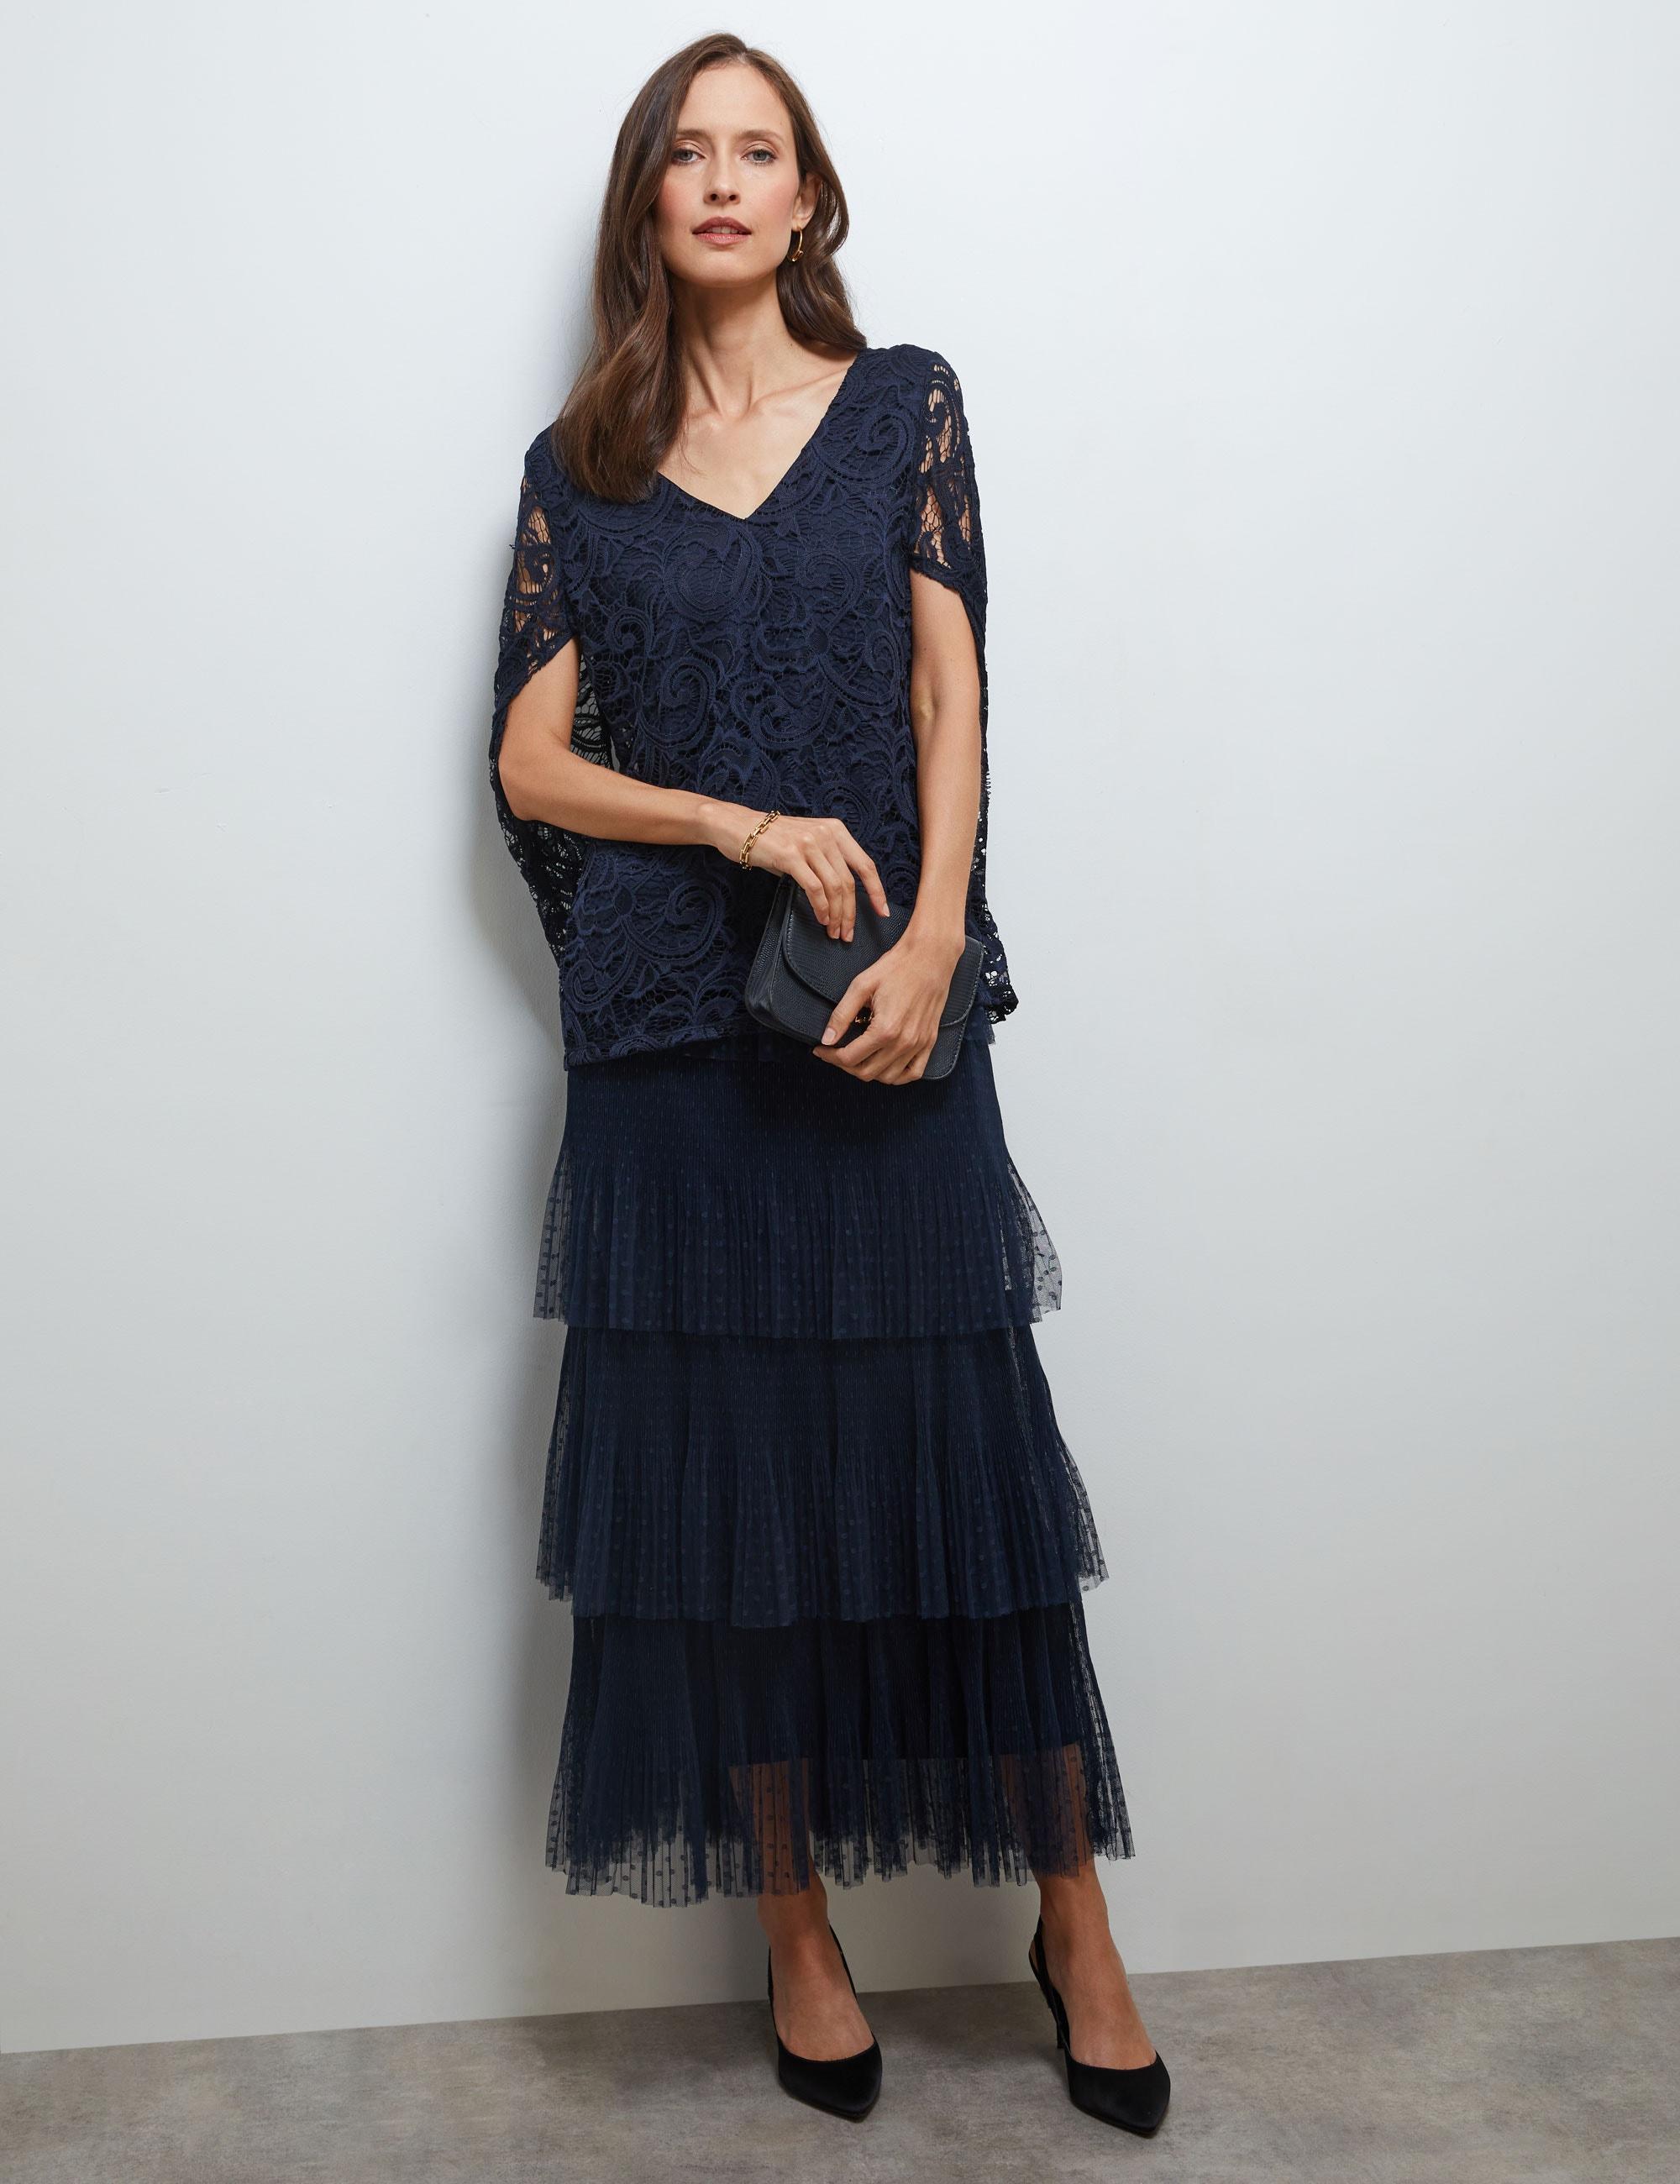 NONI B - Womens Skirts - Maxi - Winter - Blue - Casual Fashion - Work Clothes - Navy - Relaxed Fit - - Mesh Tiered - Long - Quality Office Wear